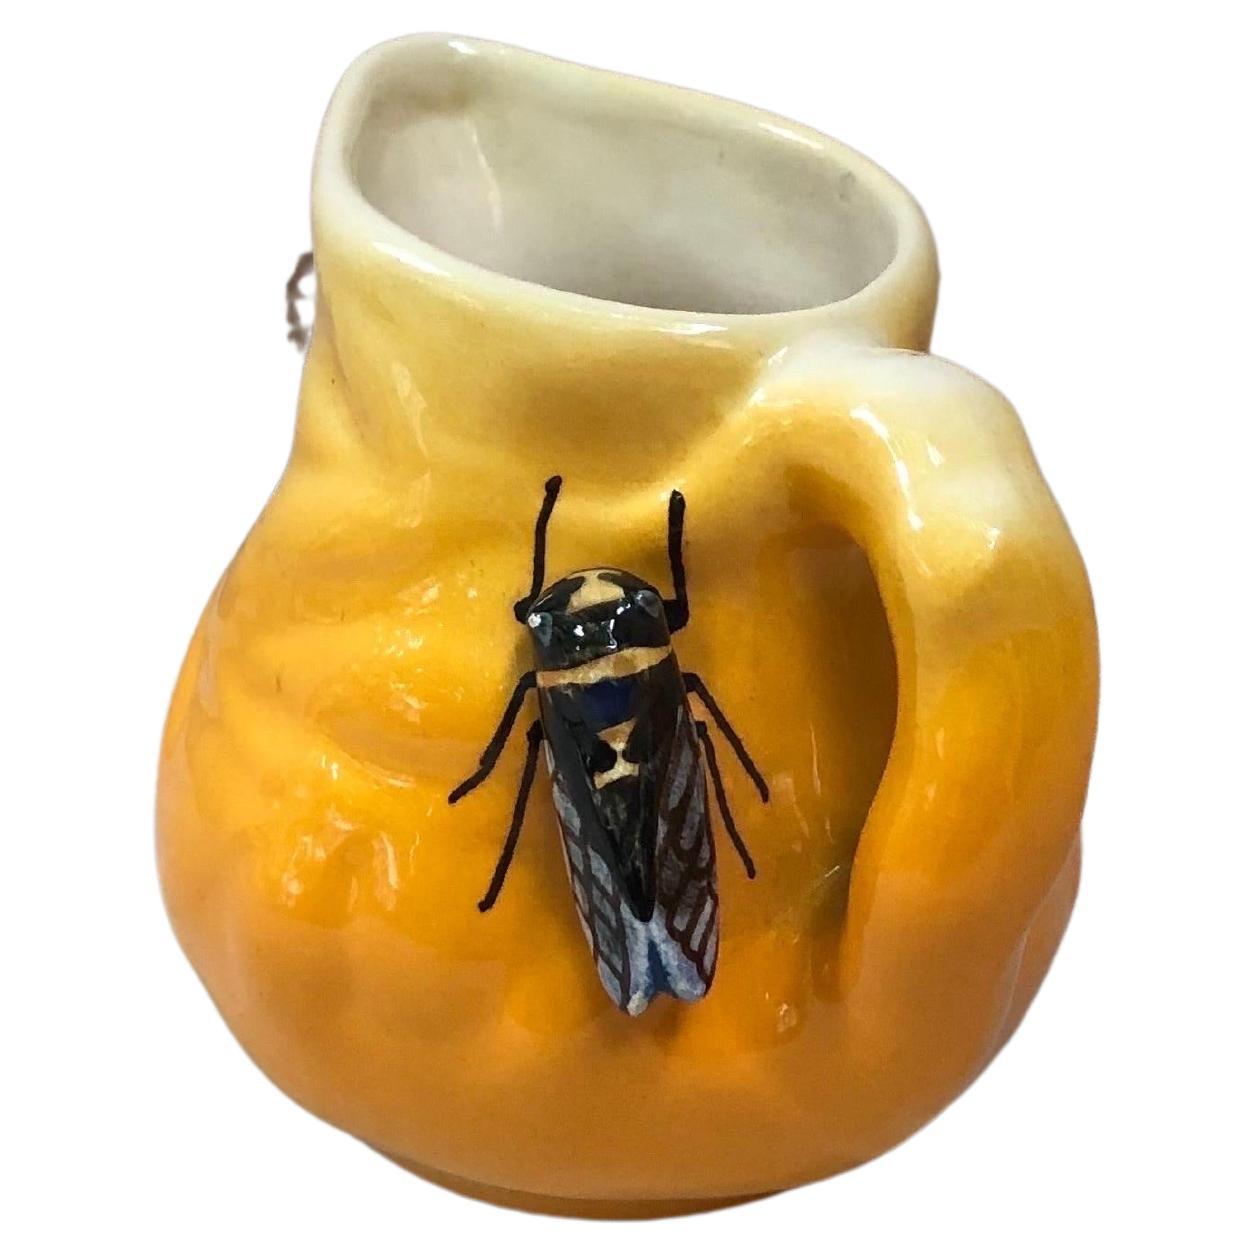 French Majolica pitcher with cicada and olives signed Sicard, circa 1950.
From South of France (Provence).